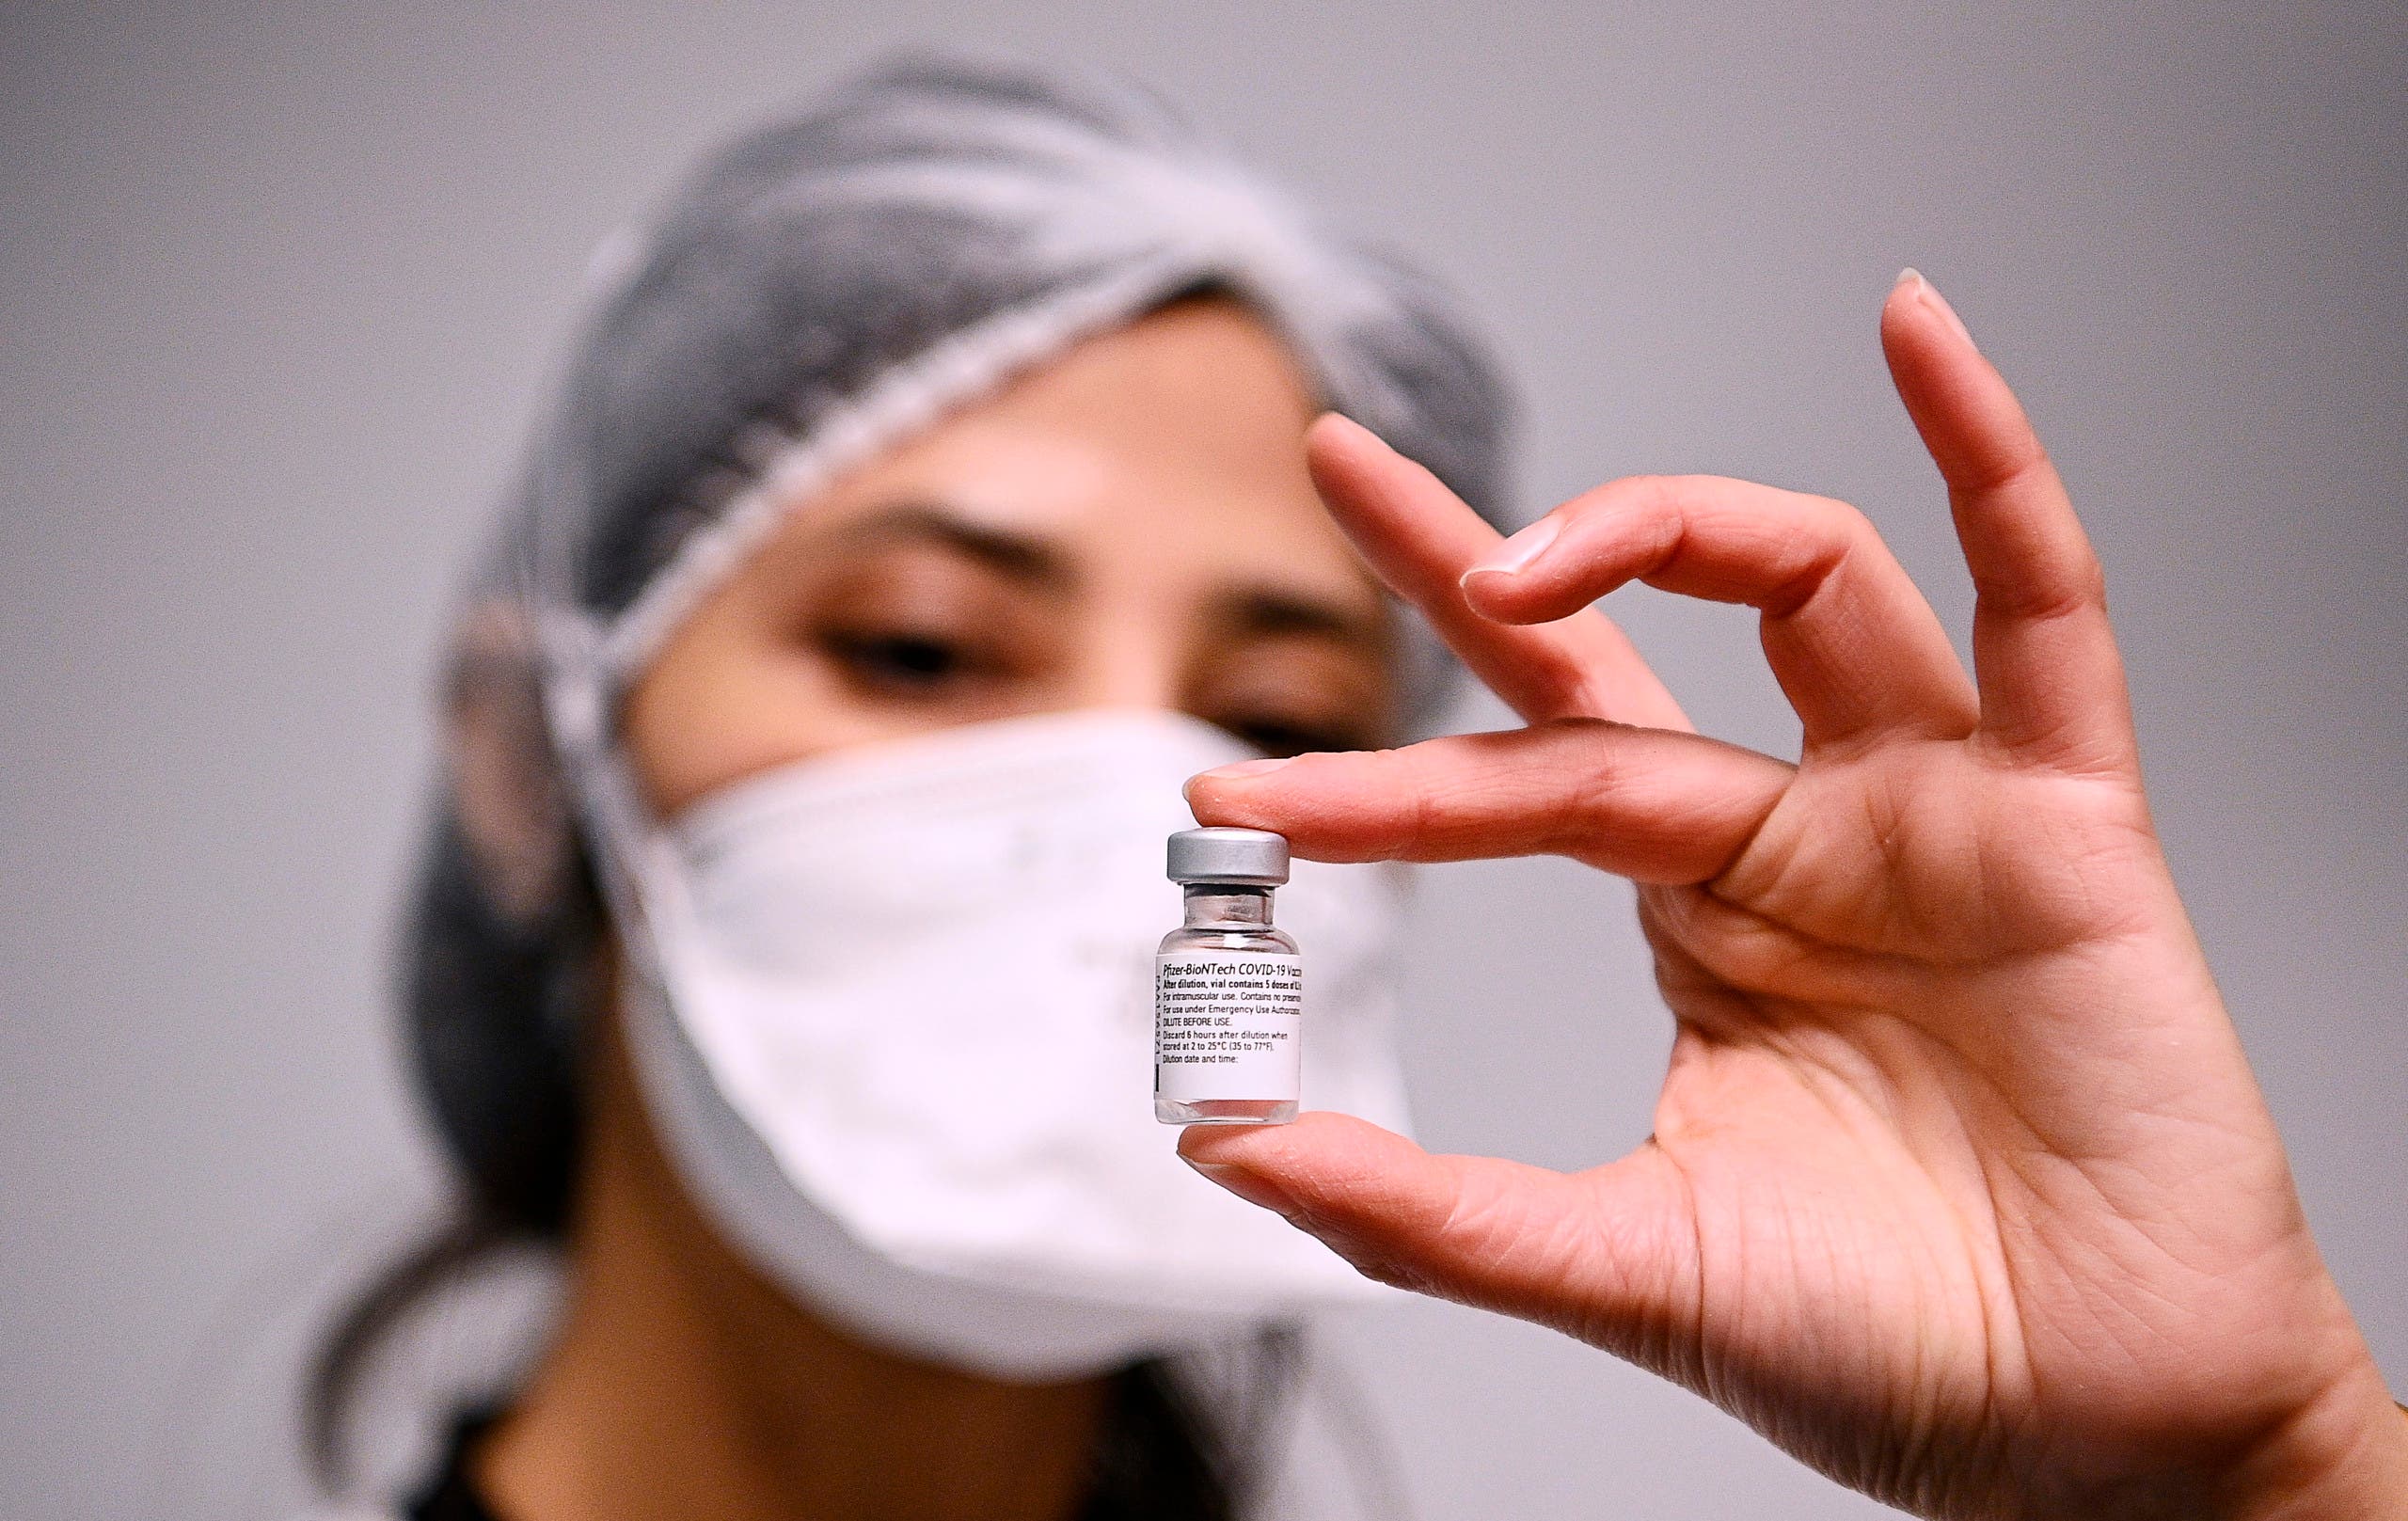 A health worker displays a dose of the Pfizer-BioNTech COVID-19 vaccine at Robert Ballanger hospita in Aulnay-sous-Bois, north of Paris. (AP)